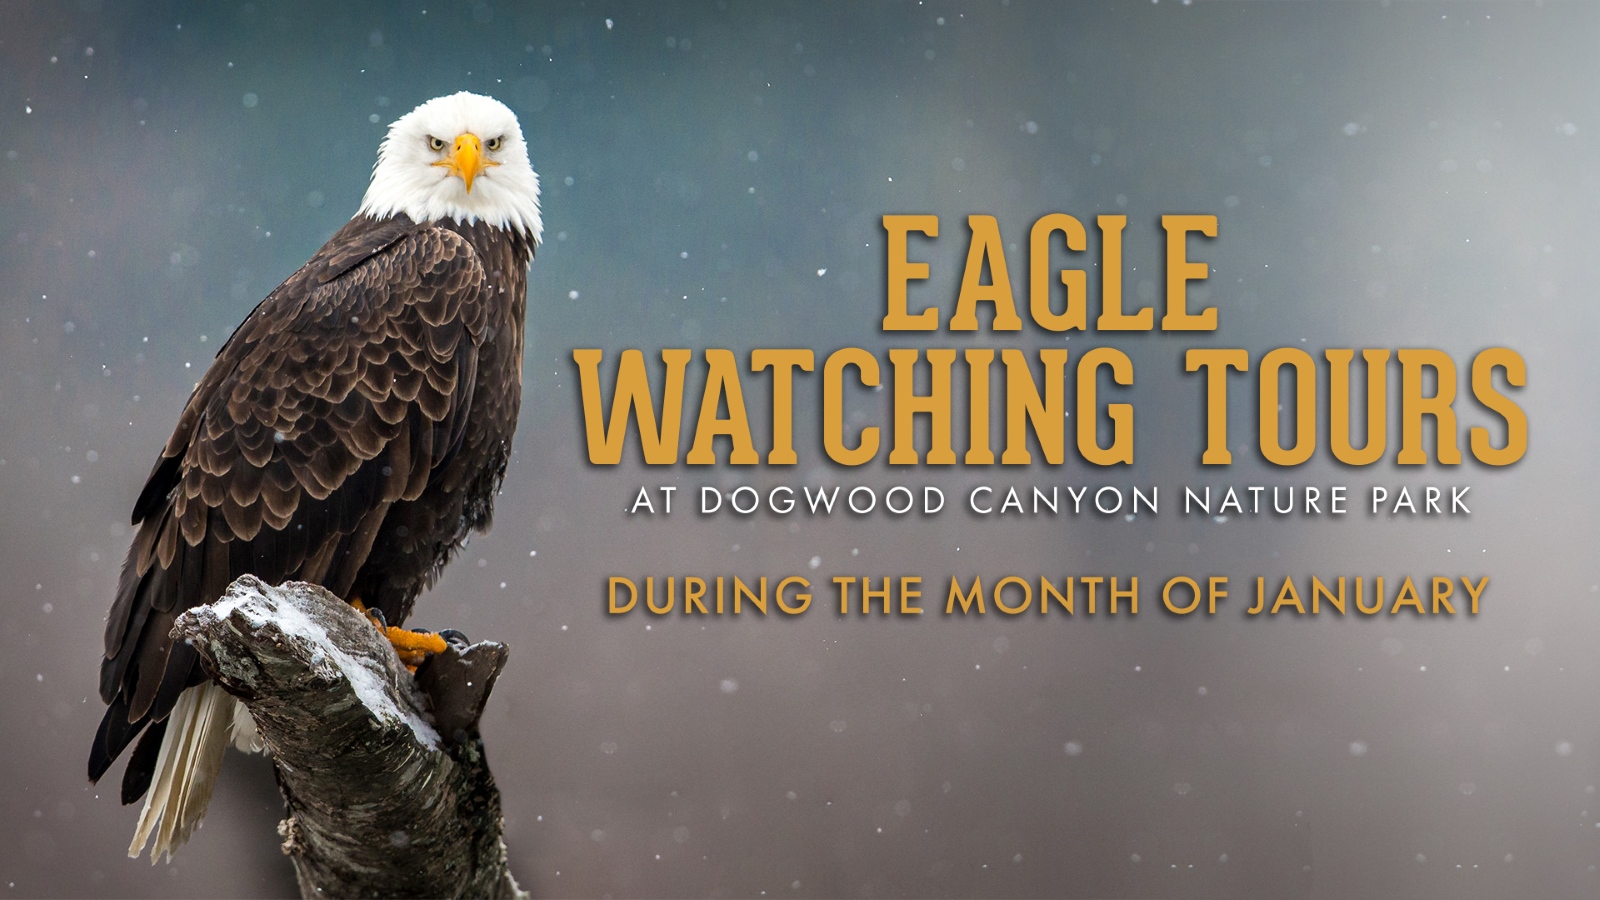 A bald eagle perches on a log. Text on the image reads: "Eagle Watching Tours at Dogwood Canyon Nature Park during the month of January"